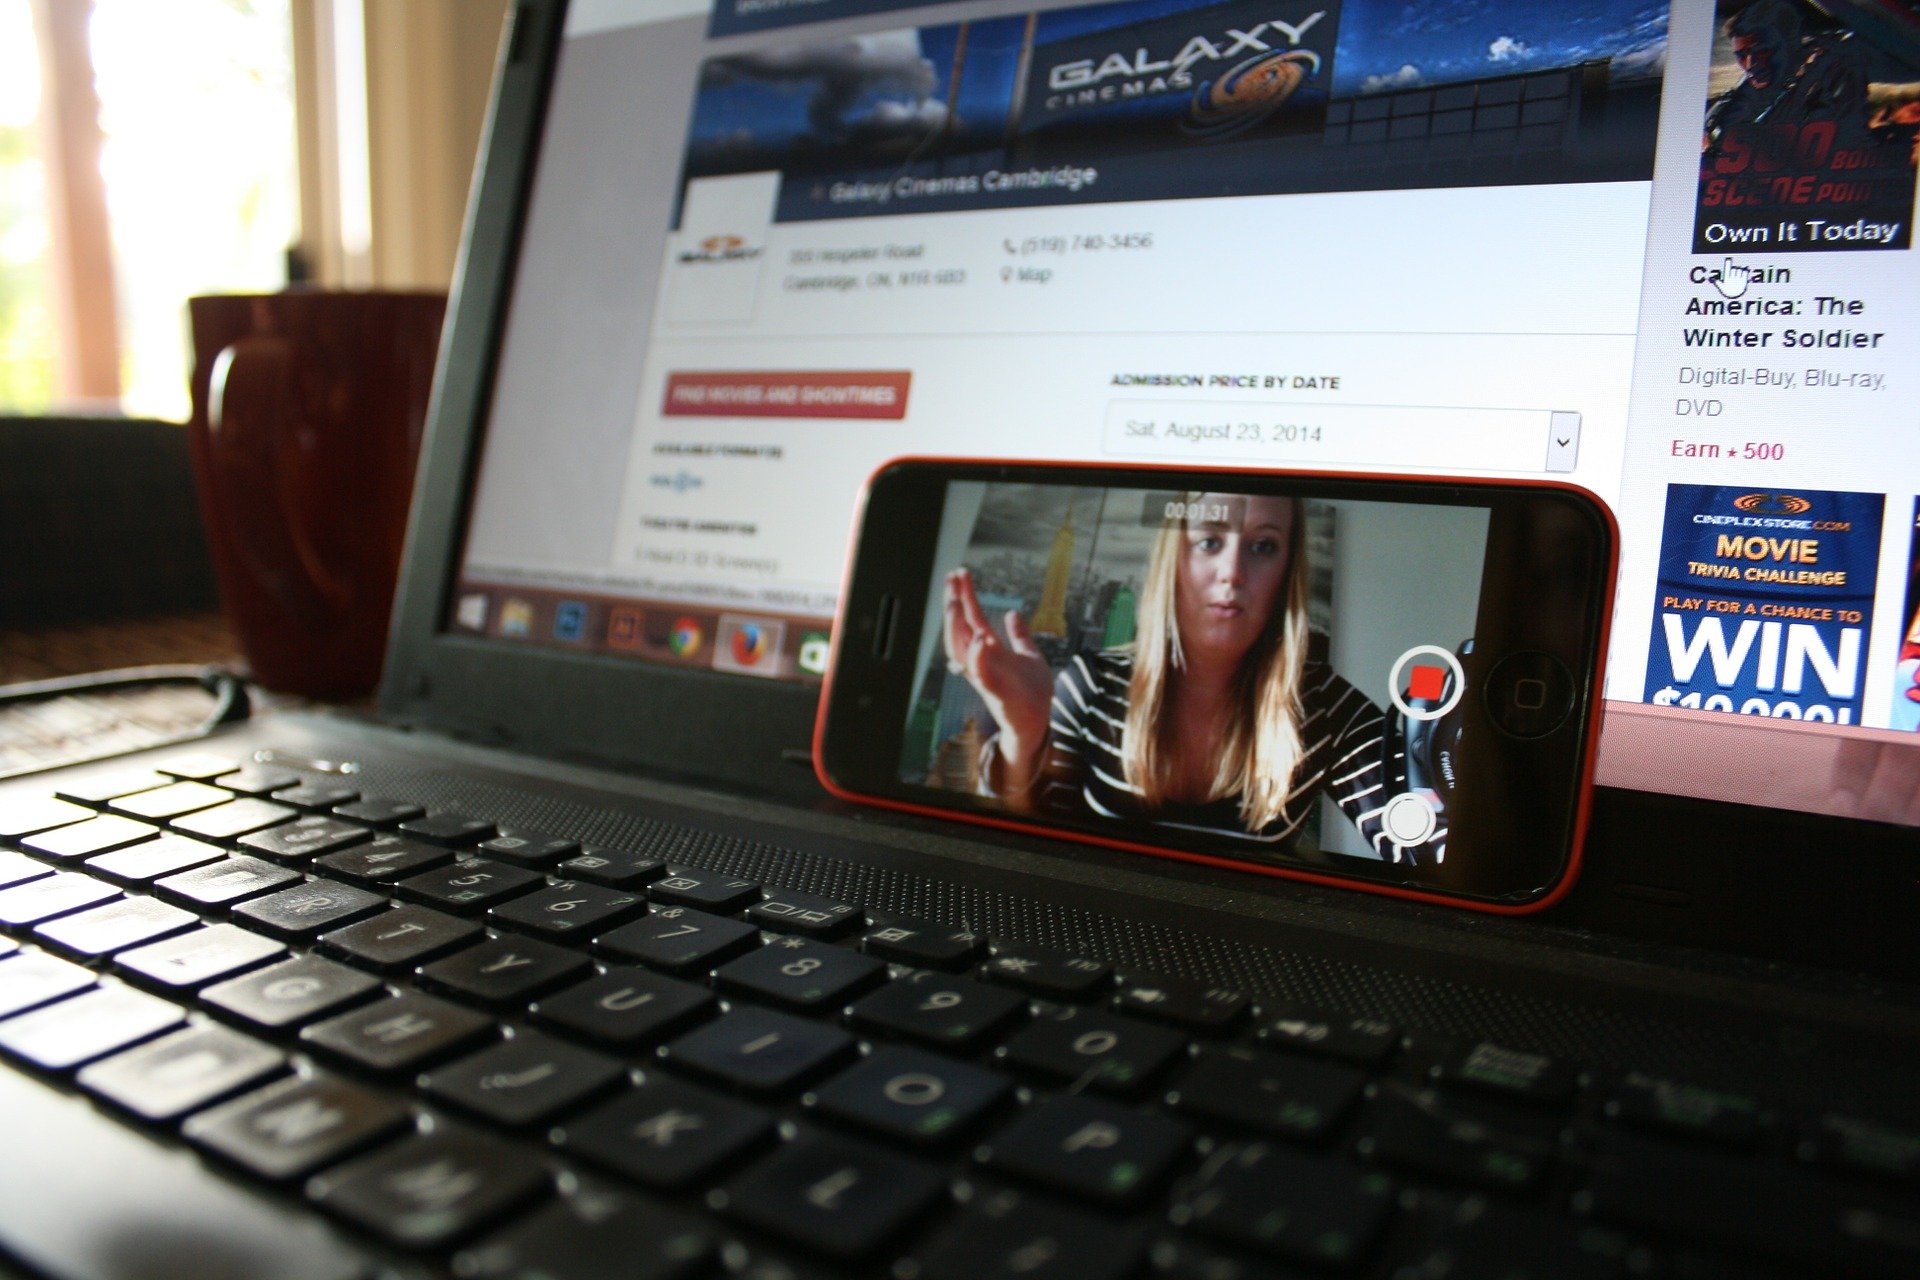 Image of a laptop and phone with video conferencing